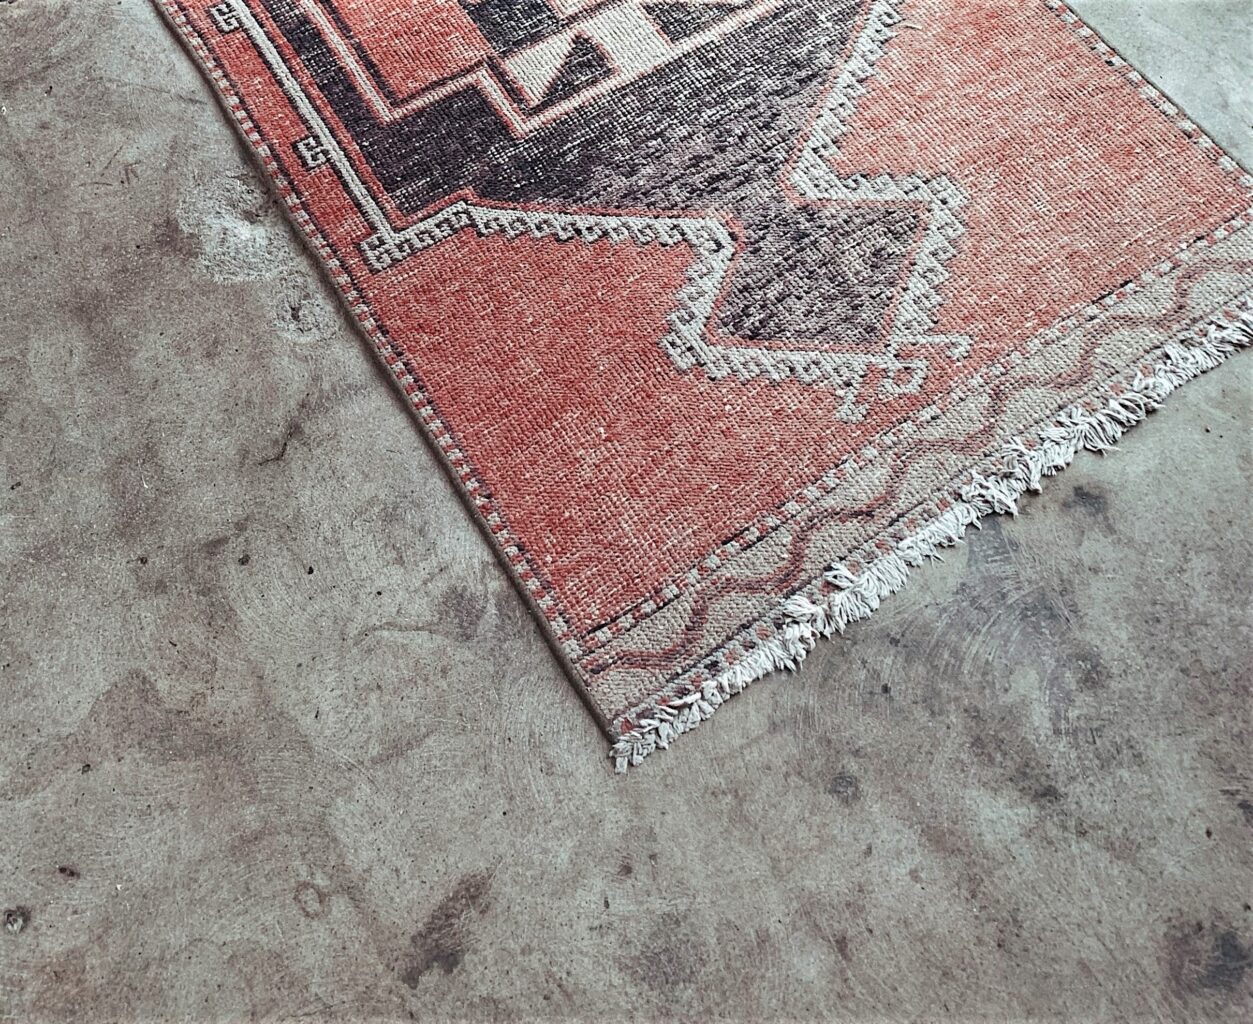 Tribal rug is rolled out on concrete floor.